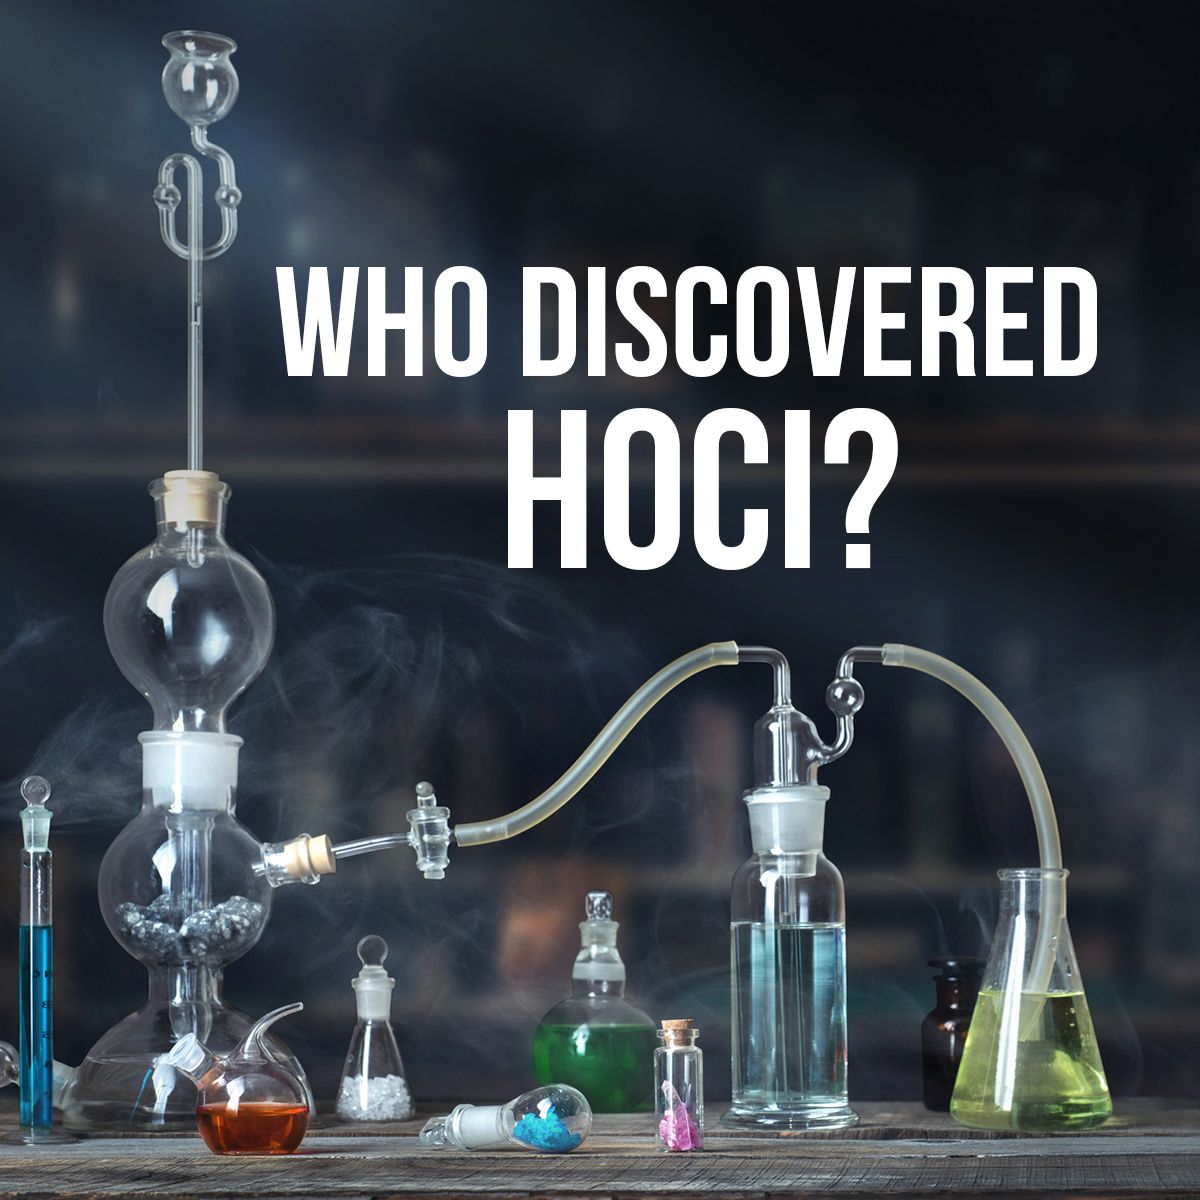 Who Discovered HOCl?